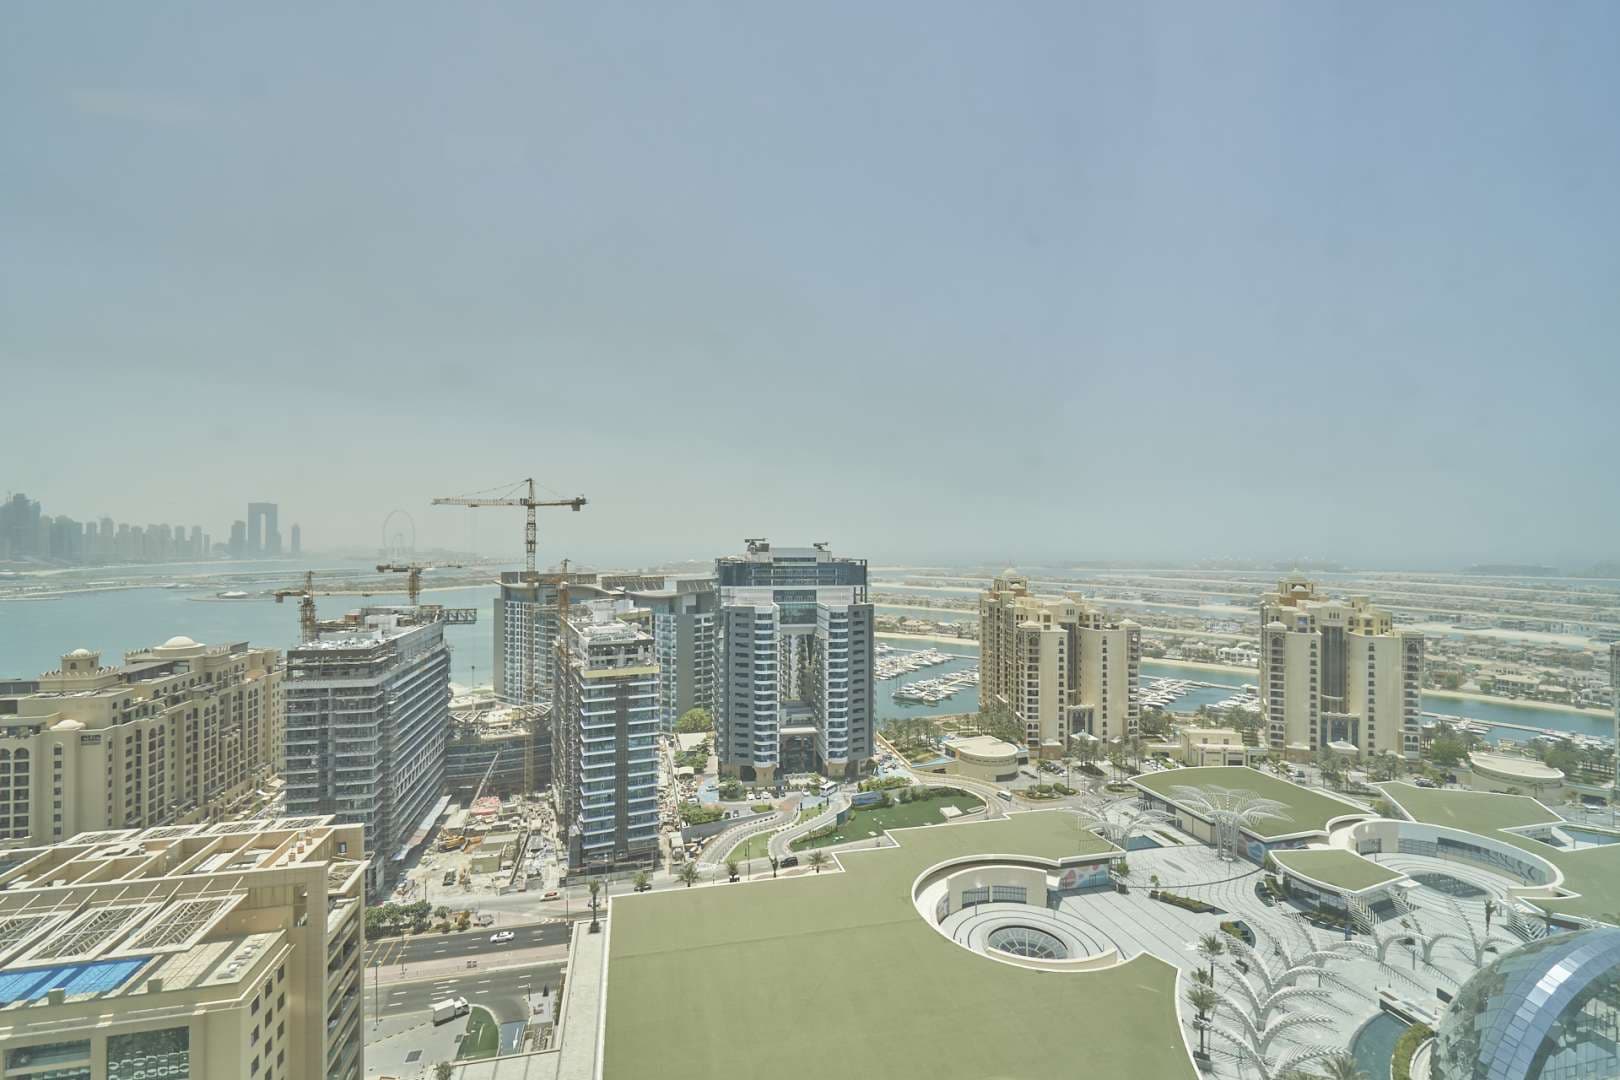 1 Bedroom Apartment For Sale The Palm Tower Lp07265 241b0caa787cfc00.jpg